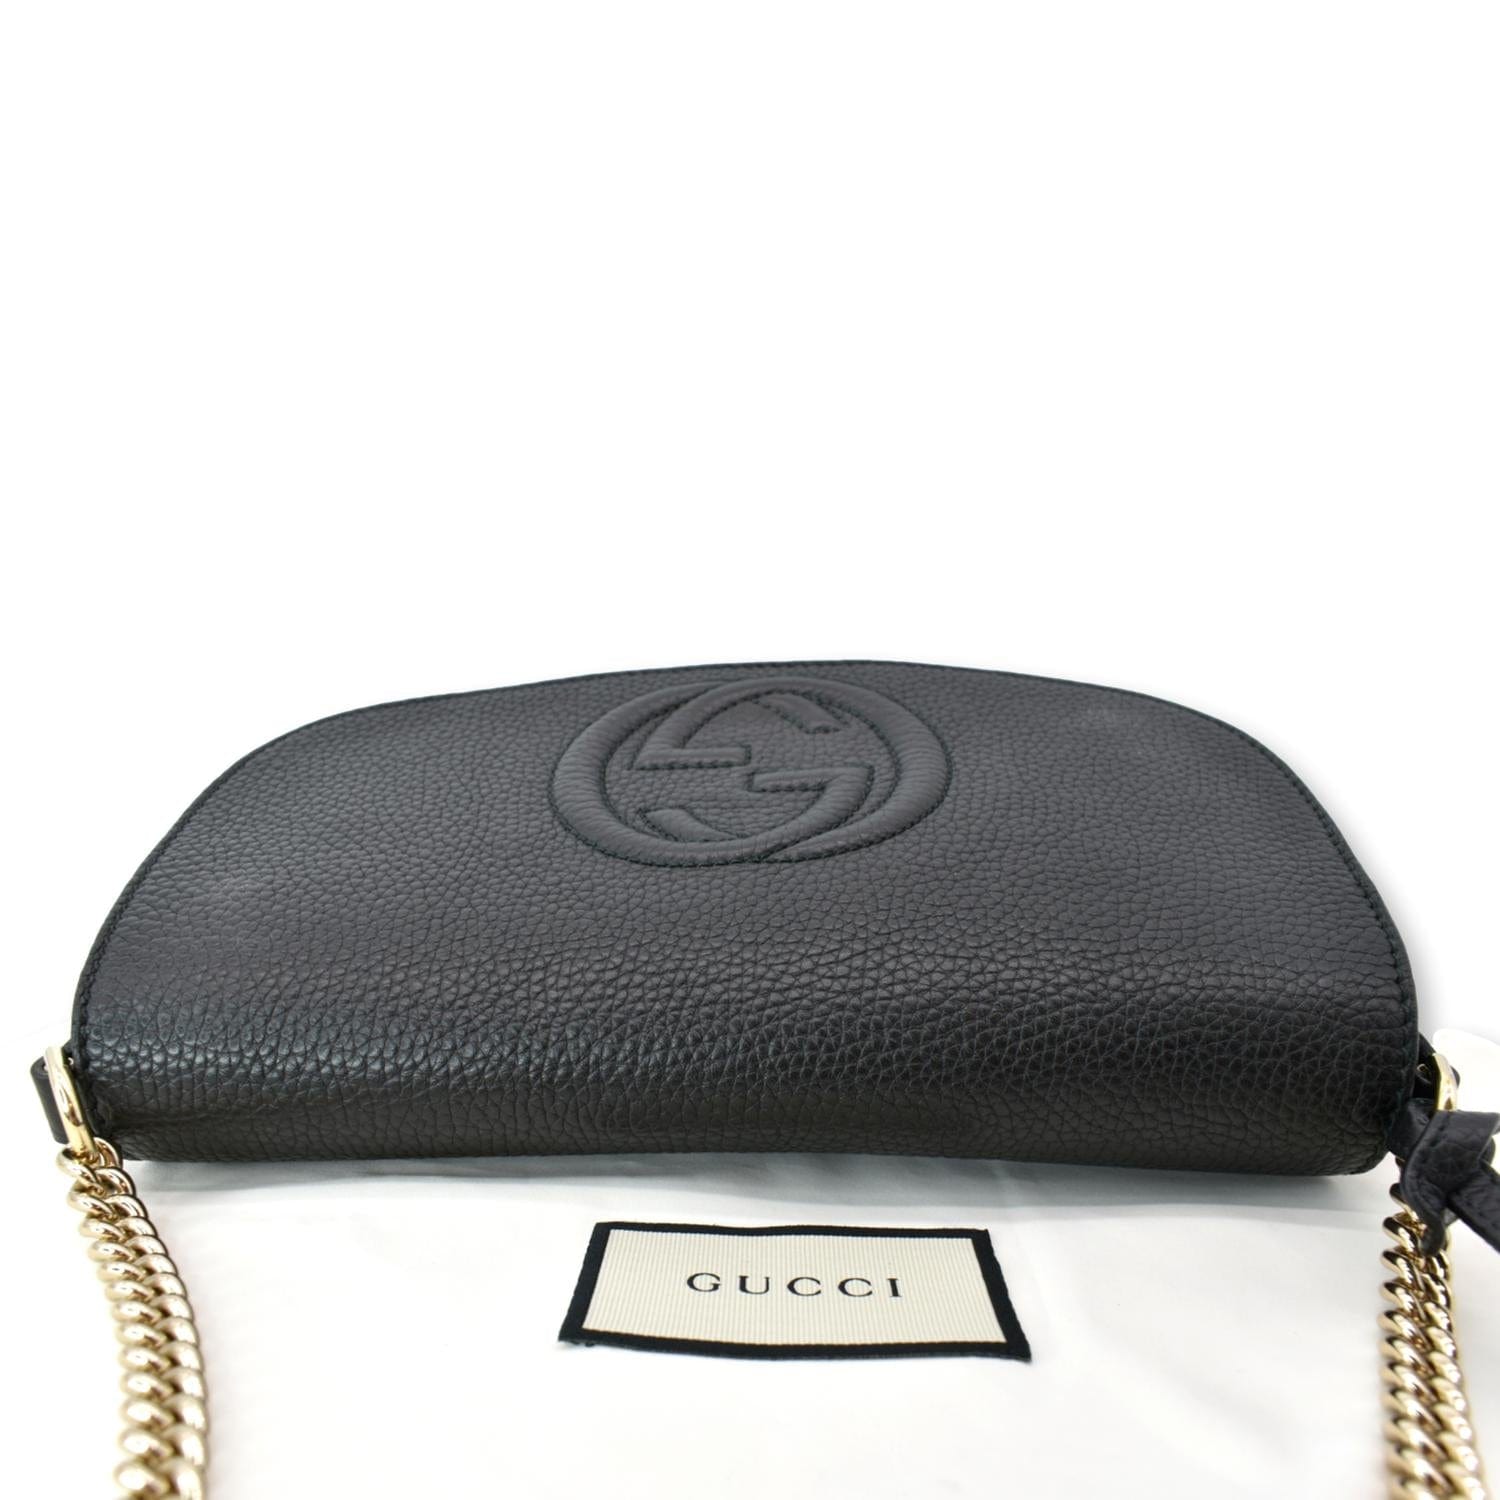 Gucci Black Leather Soho Clutch with GG and Tassel – The Hangout